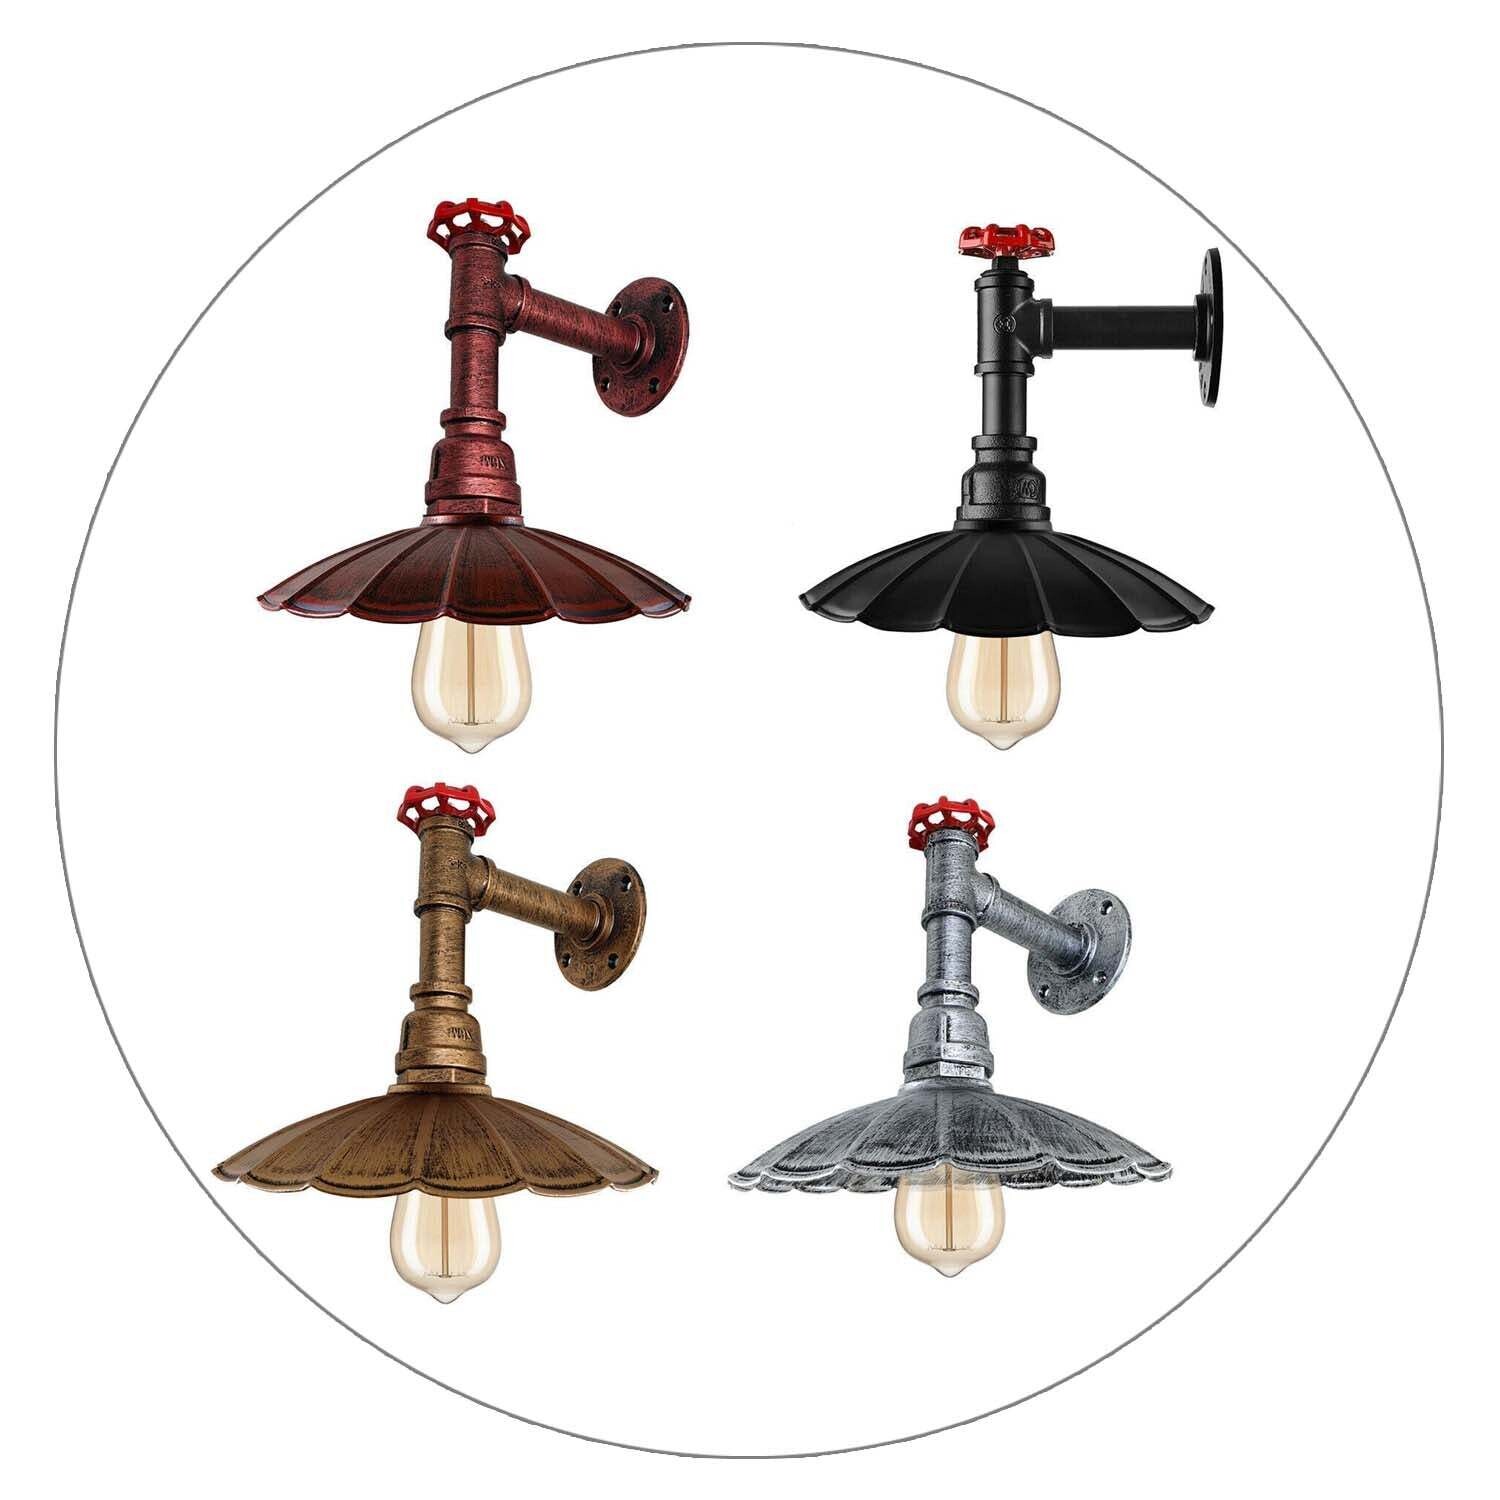 Vintage Wall Pipe Light Fittings Indoor Sconce Metal Lamp Umbrella Shape Shade for Basement~1592